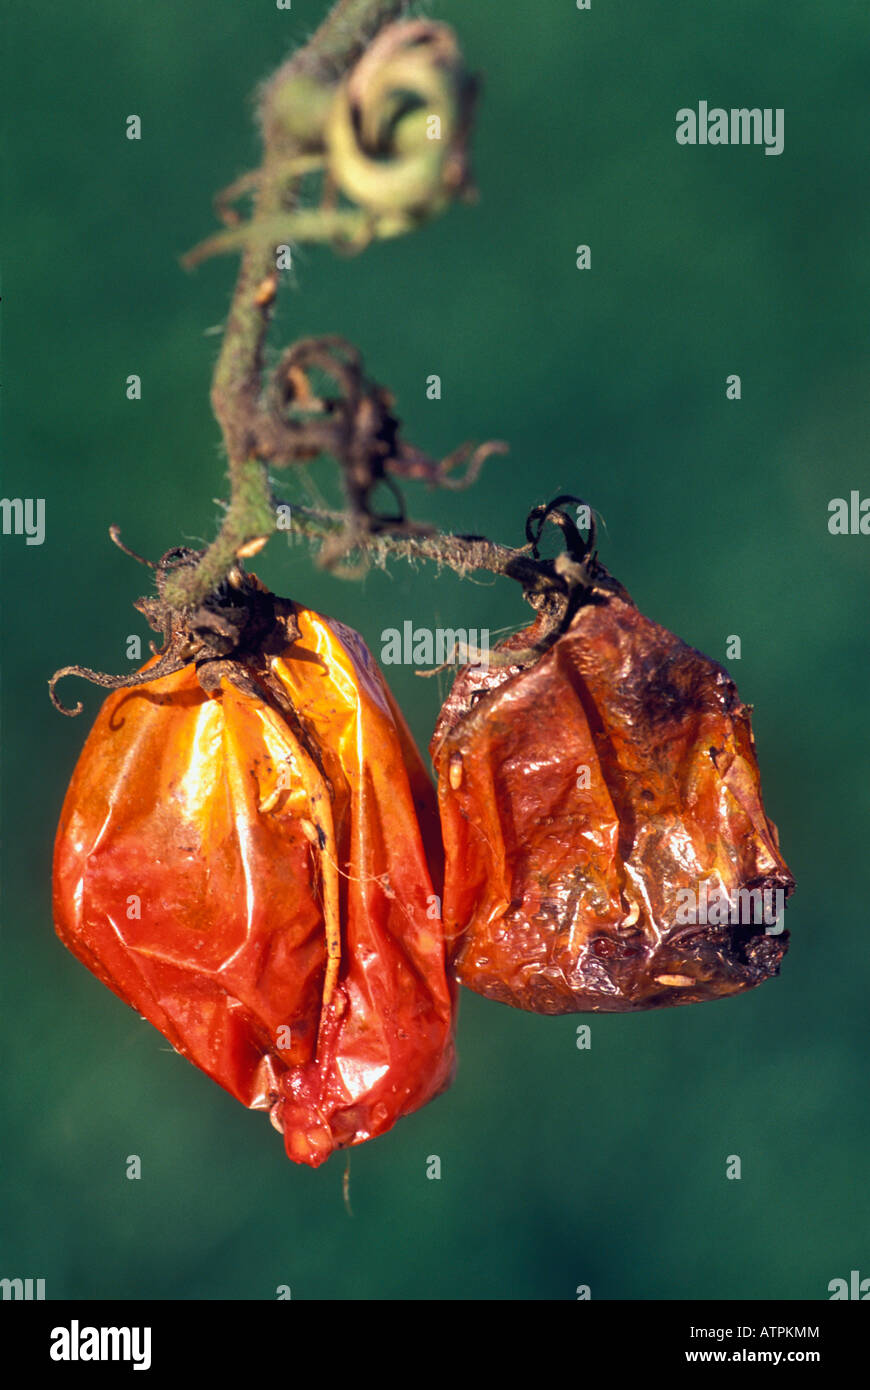 Two Tomatoes Decaying on the Vine Stock Photo